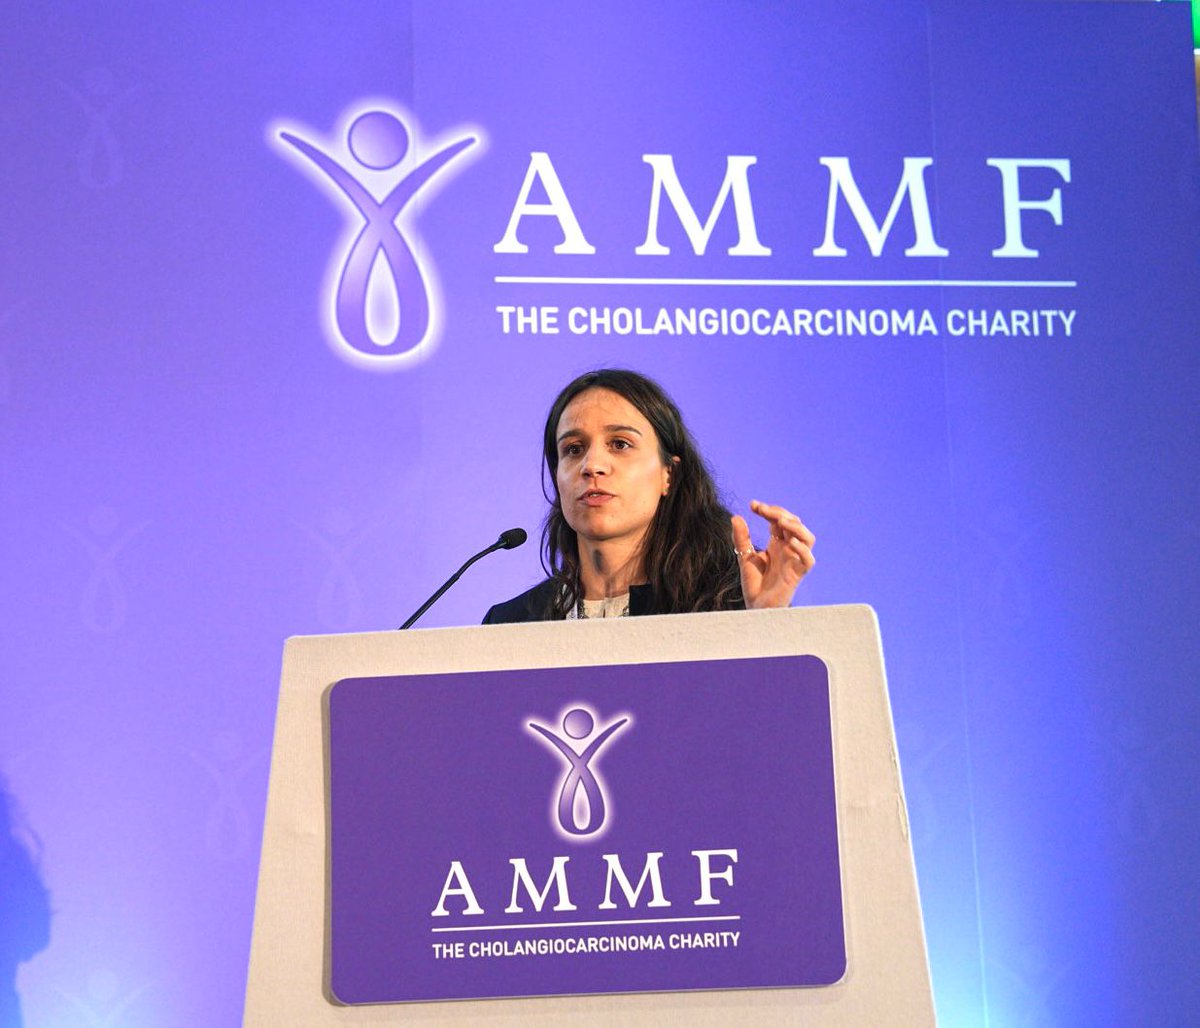 Dr. Micol Damiani from @imperialcollege presented her research on developing a nanopore-based sensor for detecting miRNA biomarkers in CCA and HCC and discussed the challenges in detecting miRNA in clinical samples. AMMF are proud to sponsor this exciting research project!